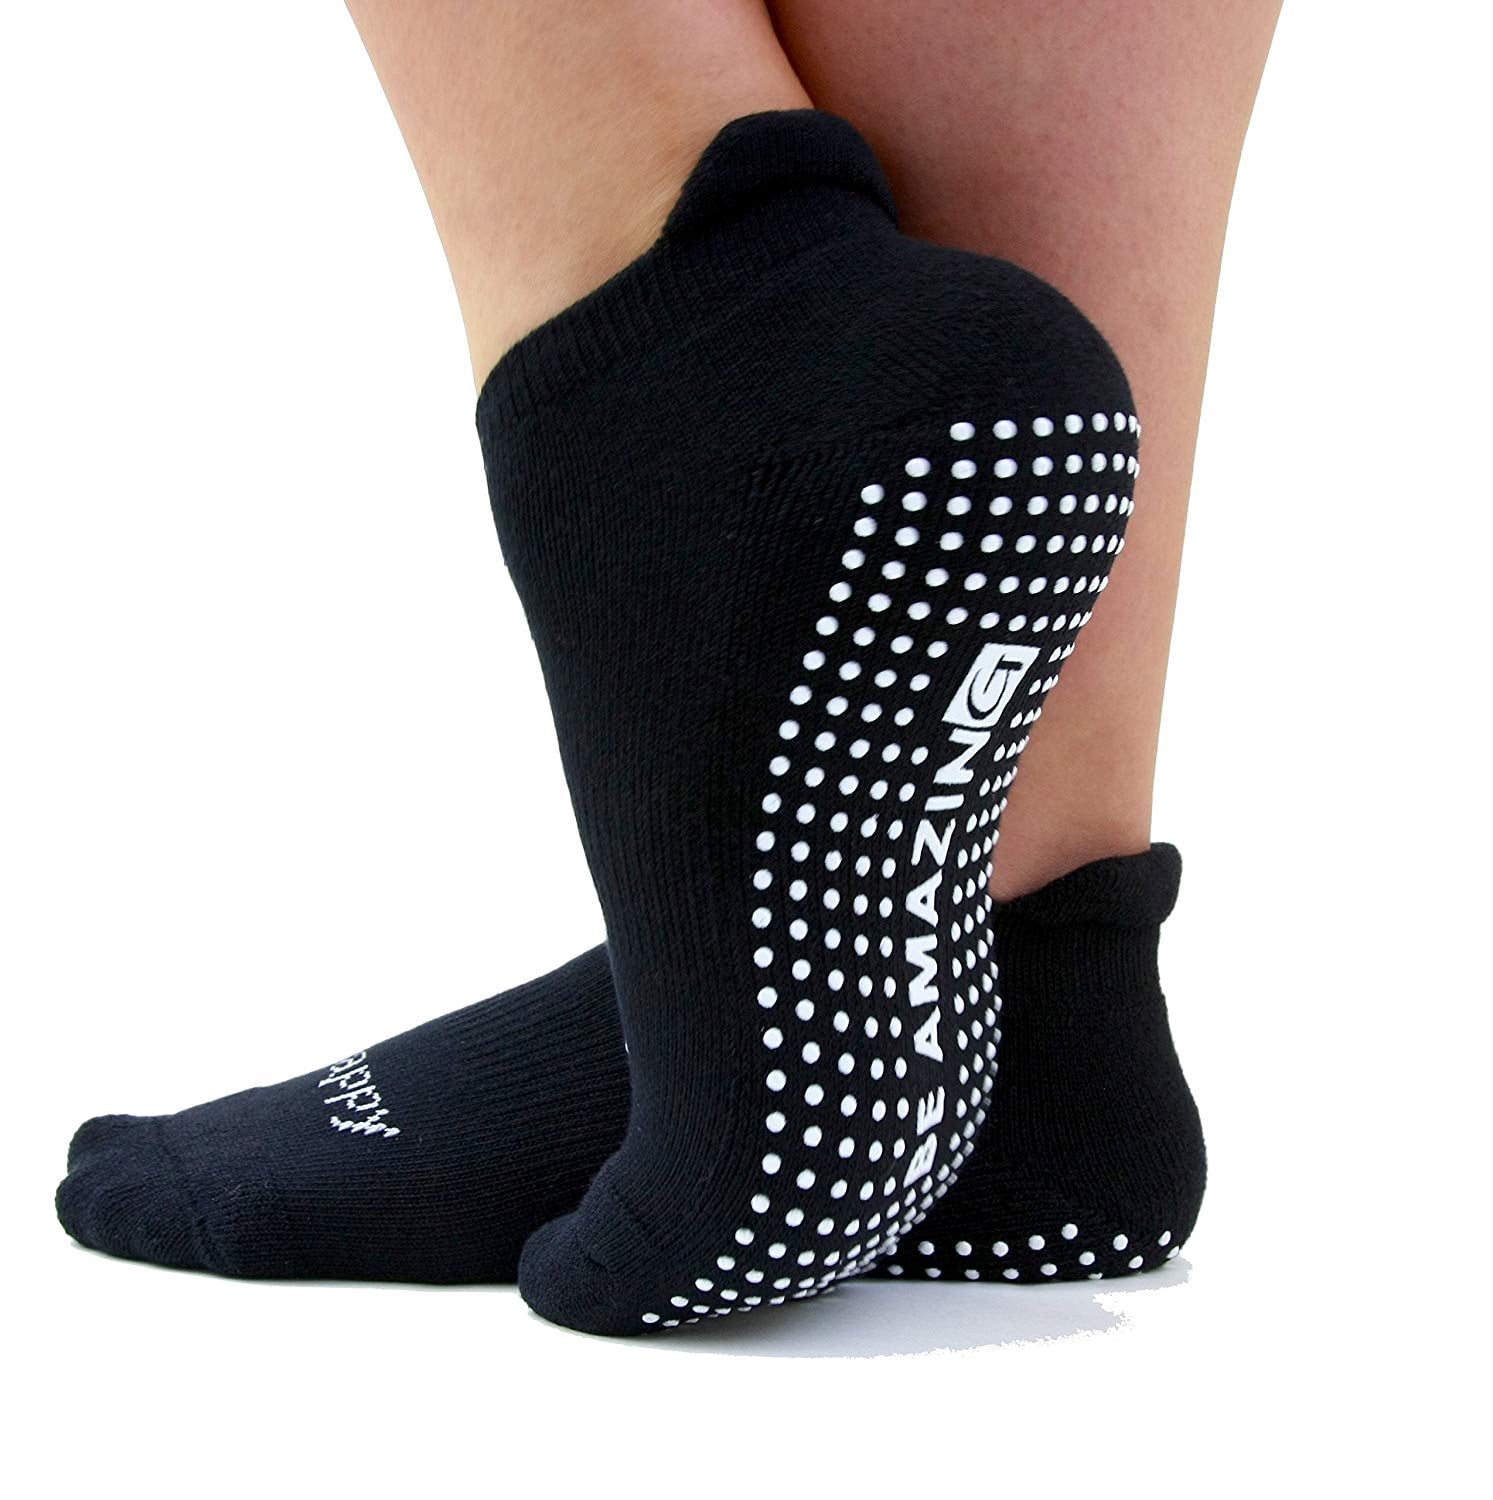 Grippy Socks  New to Barre? Here's Exactly What to Wear to Your